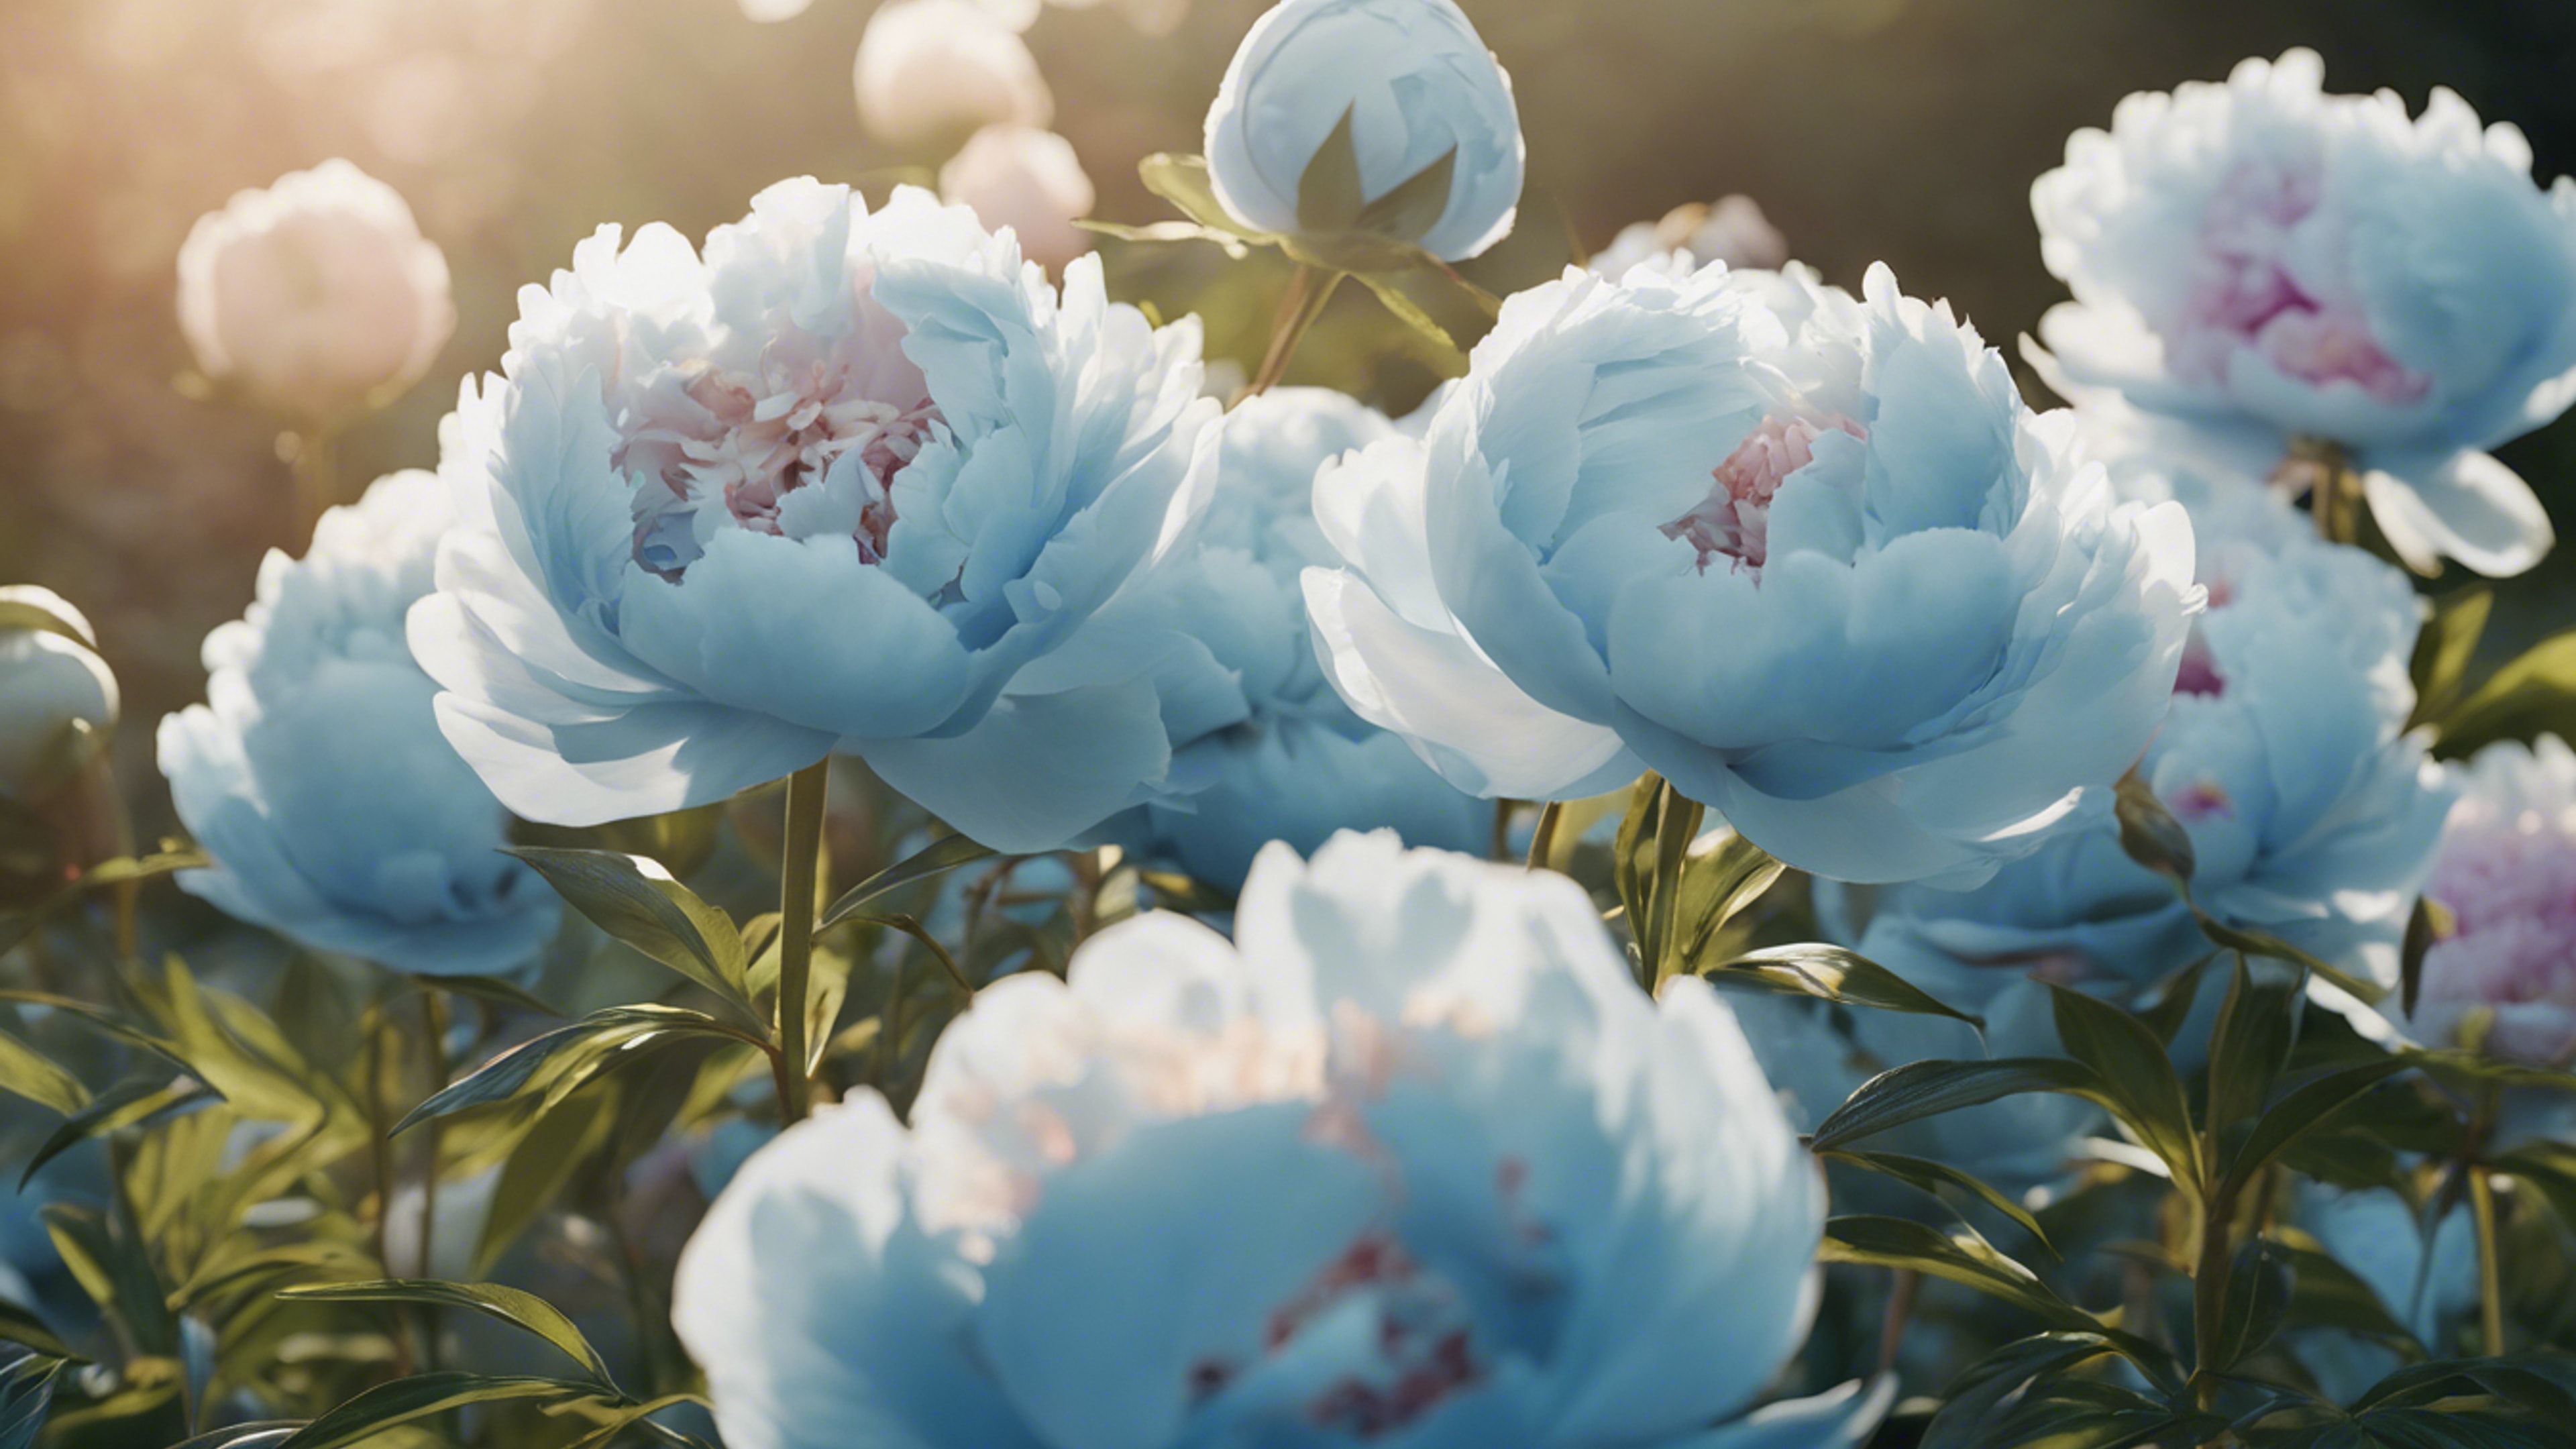 An array of pastel blue peonies blooming in a sunlit garden. کاغذ دیواری[bebed2869b0c4244859a]